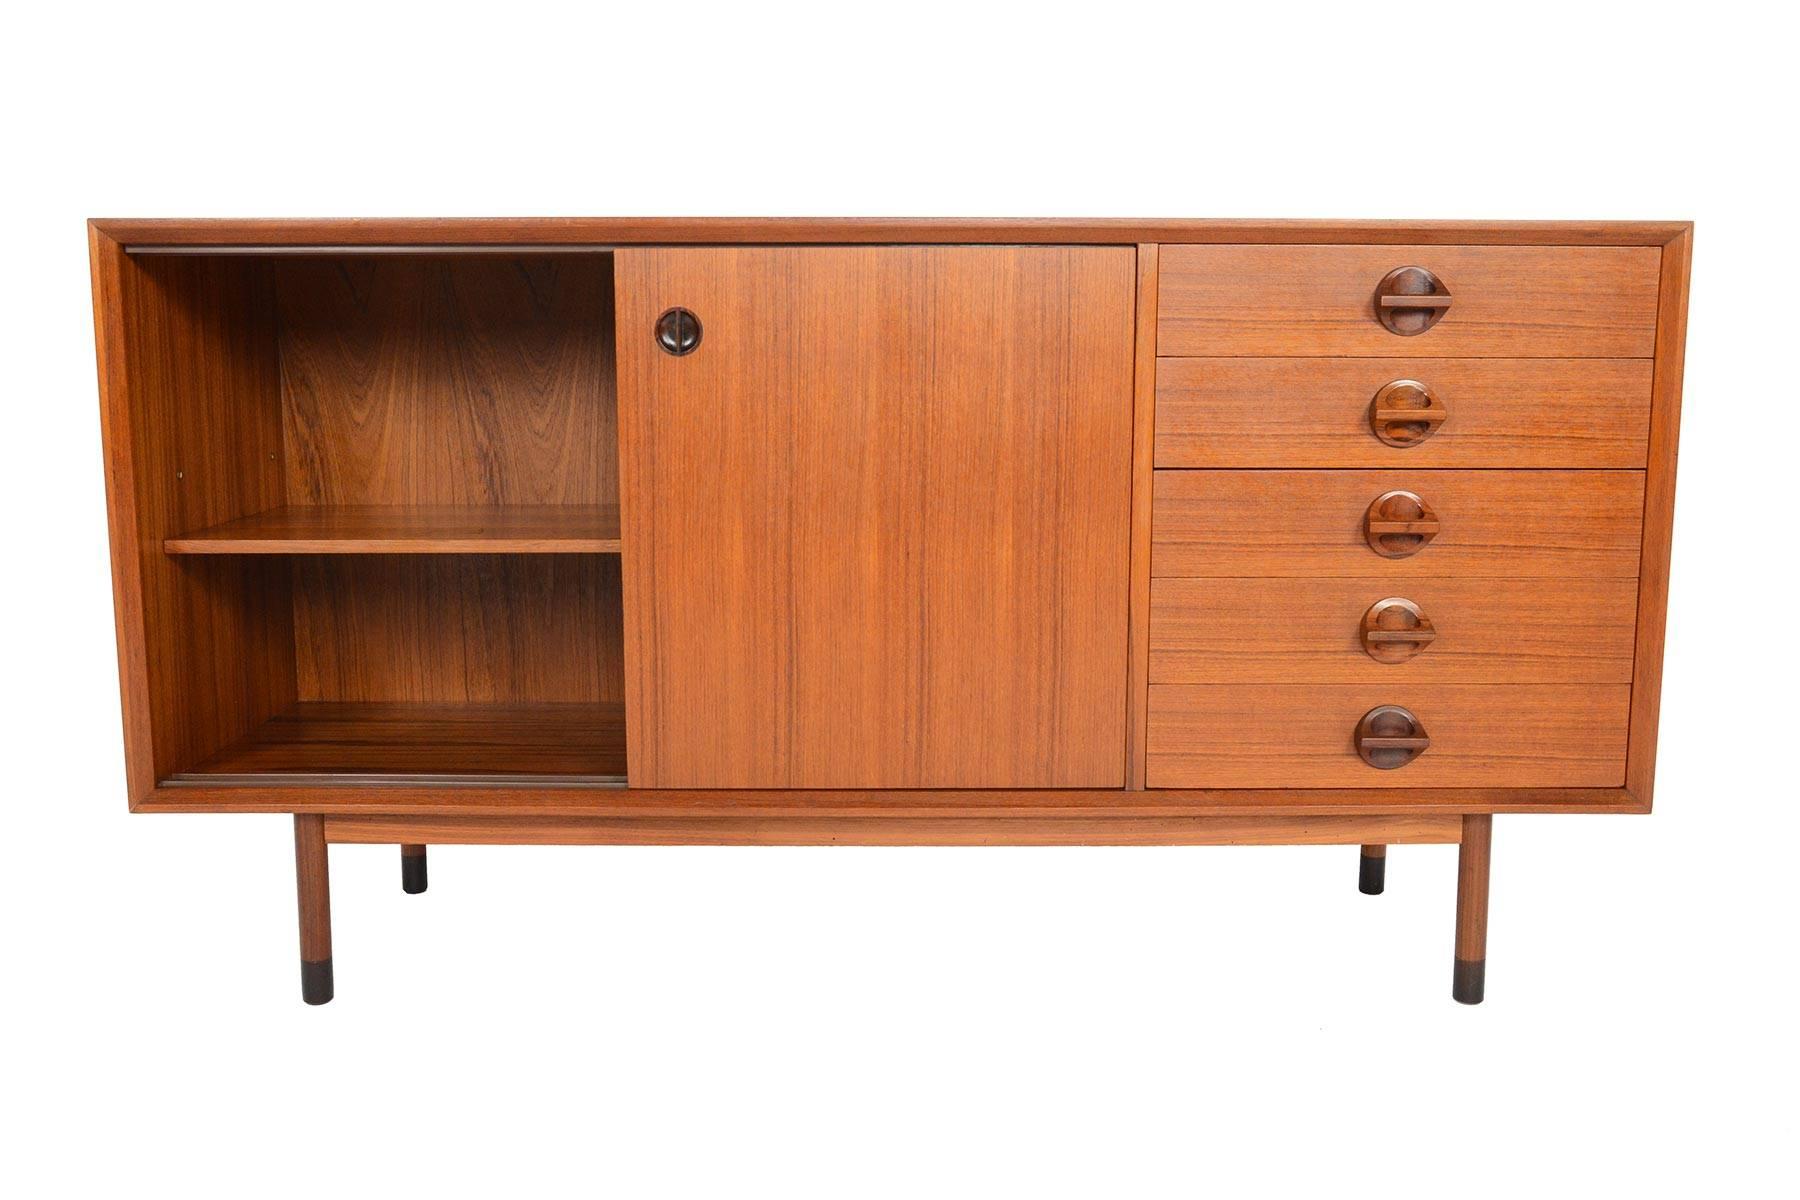 This astounding Italian Mid-Century Modern credenza by Faram is an absolute favourite. Two large teak sliding doors open to reveal an adjustable shelf. A bank of five drawers sits to the left. Doors and drawers are adorned with simply stunning